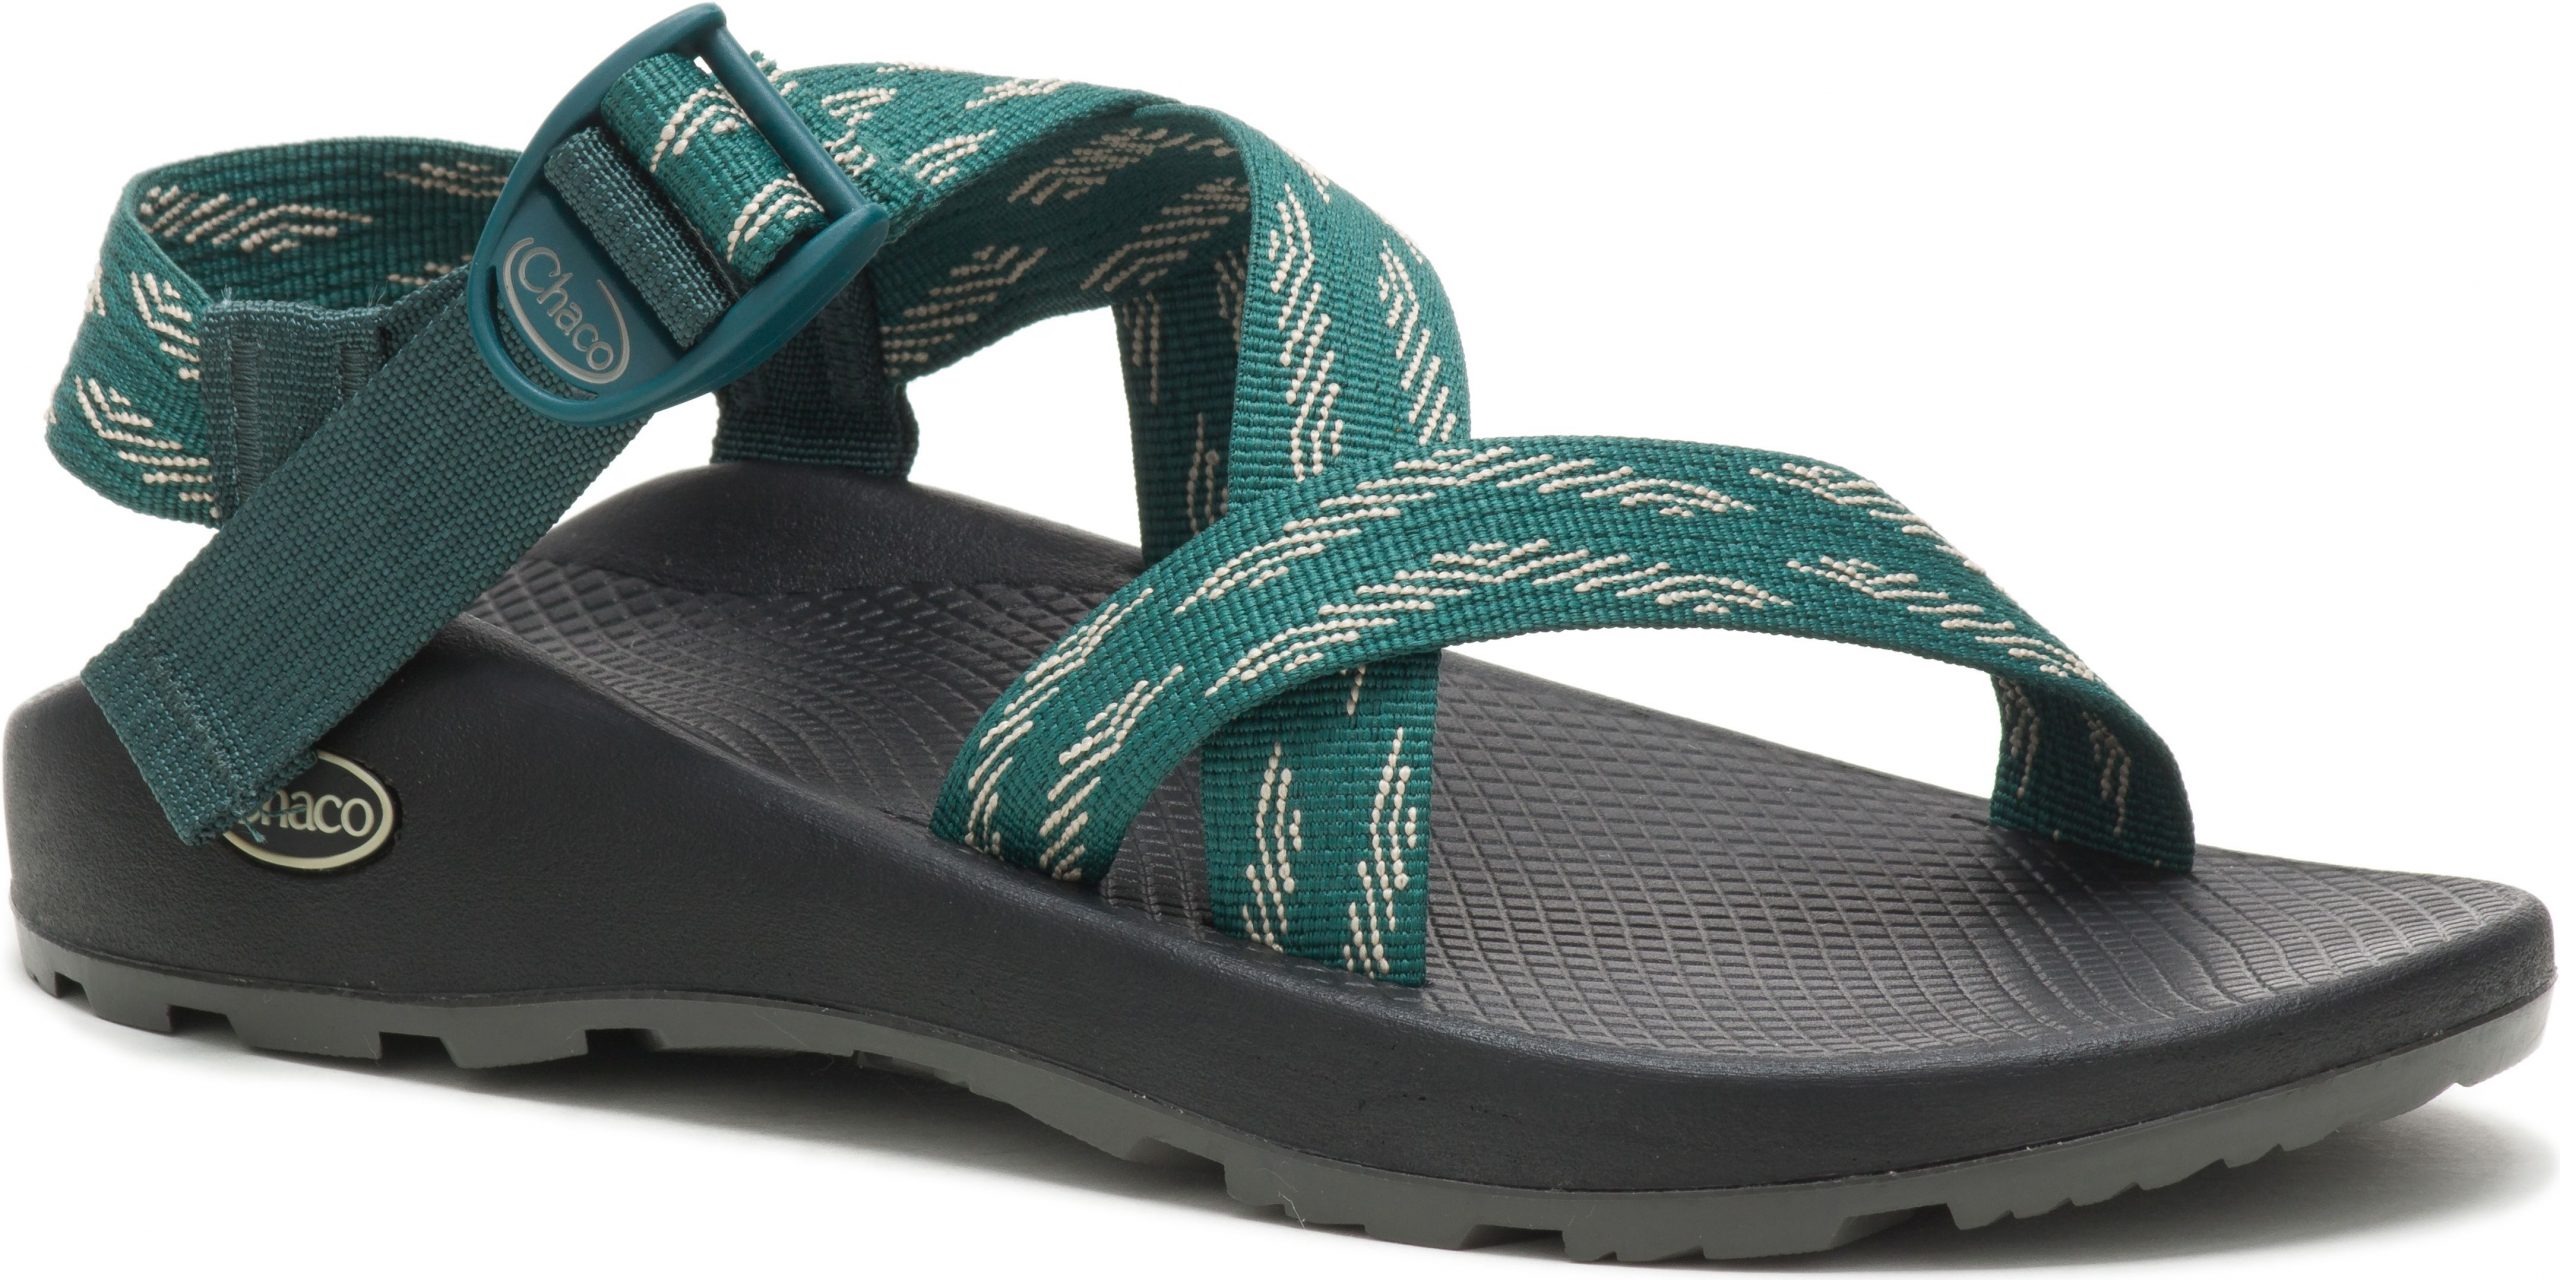 Chaco Z1 Classic Sandals – Surface Pine - Proper Magazine